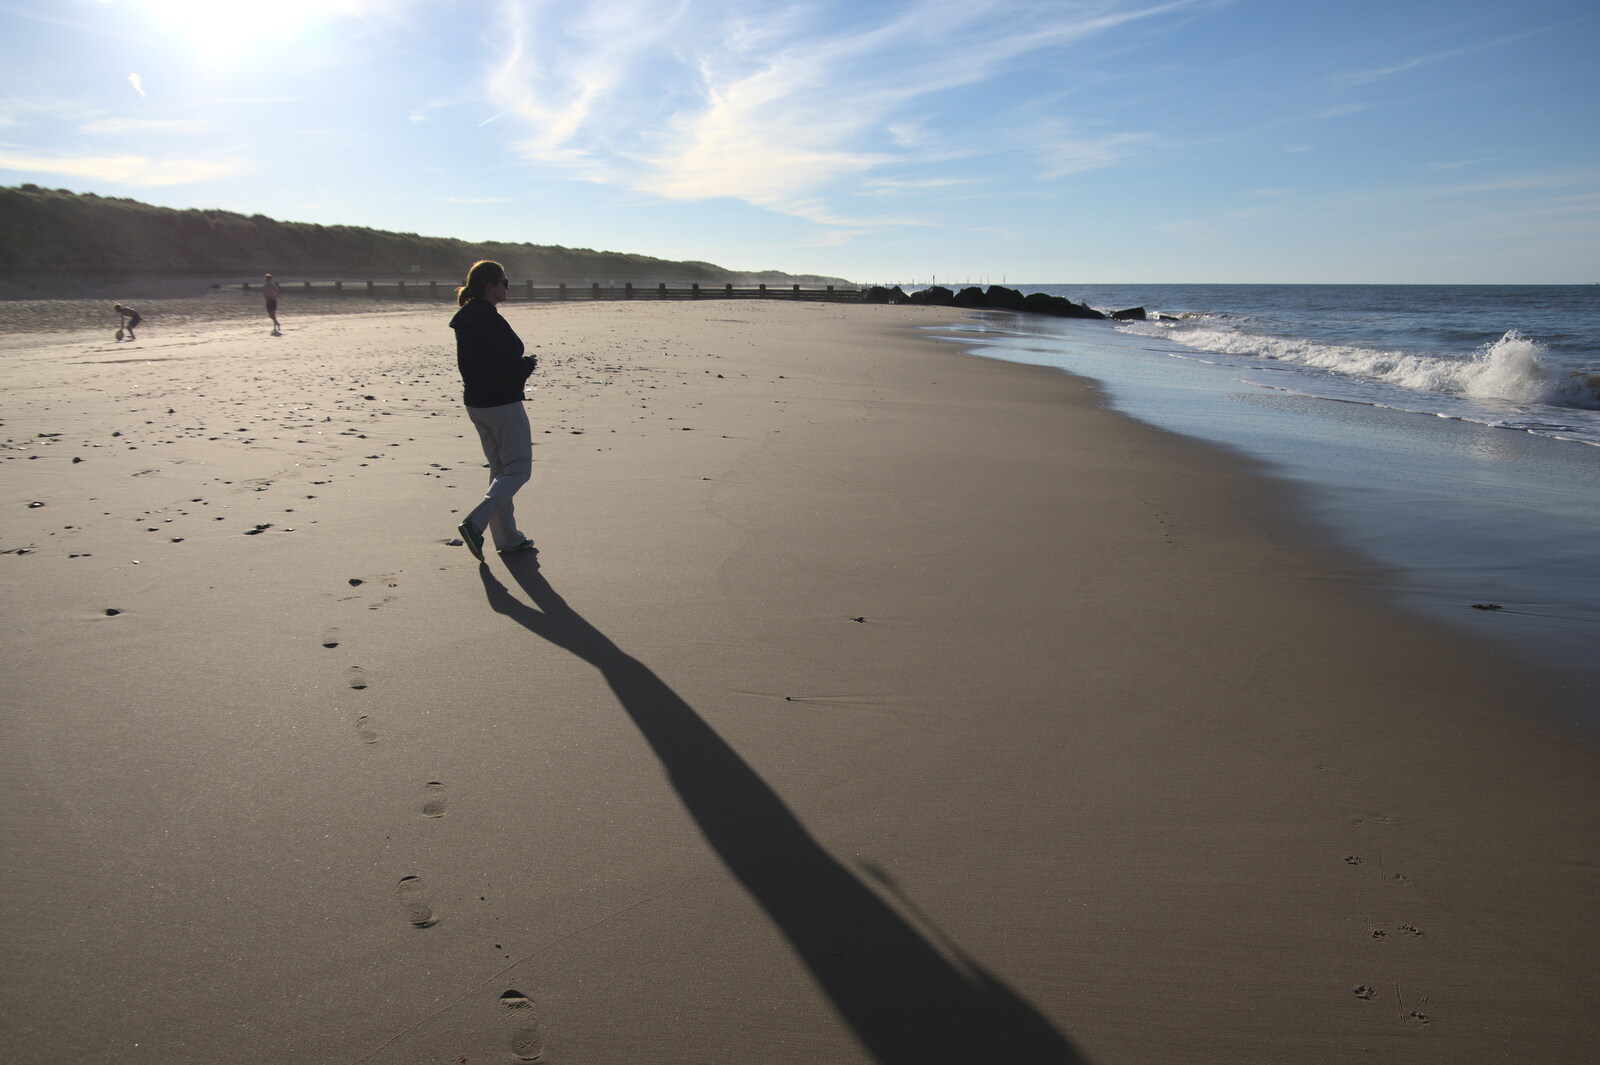 Isobel and a long shadow from Camping in the Dunes, Waxham Sands, Norfolk - 9th July 2022